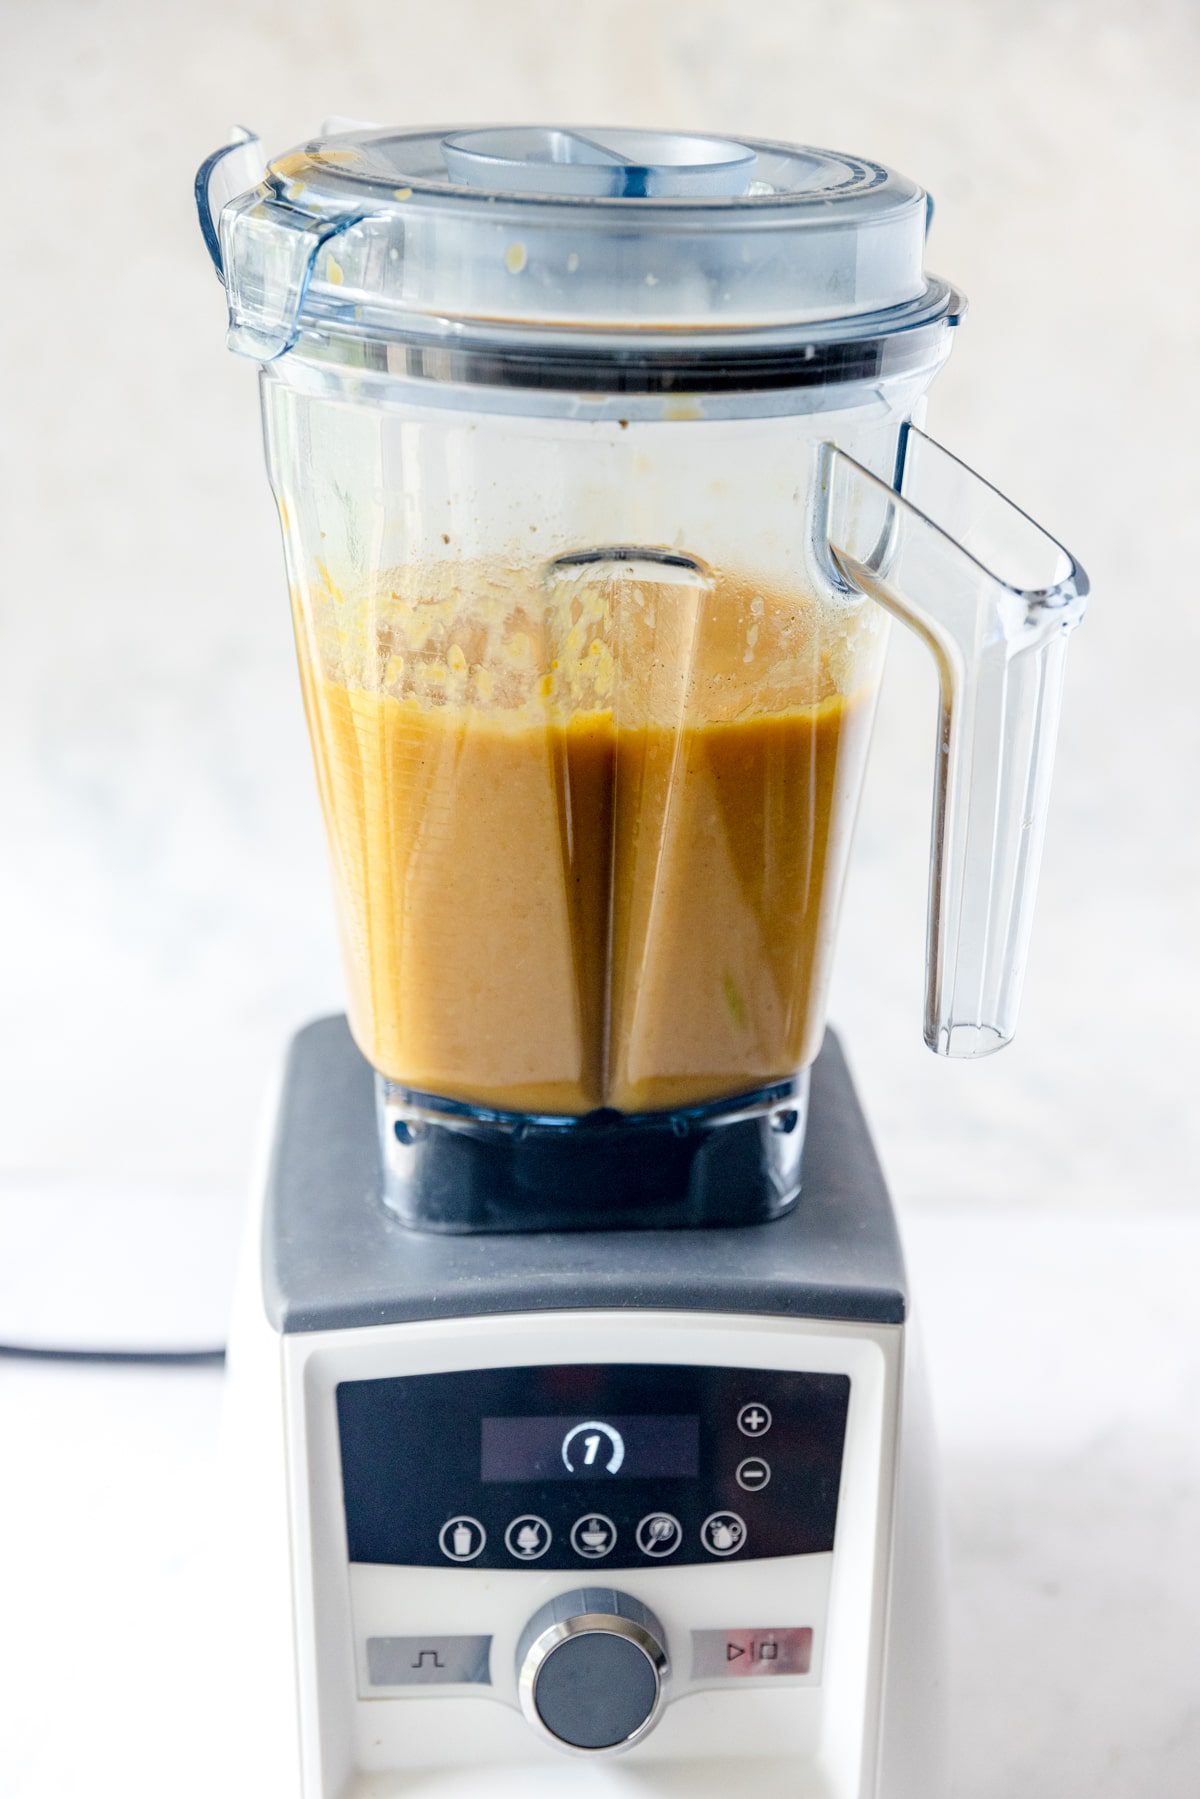 all roasted vegetables added to a blender and blended smooth with chicken stock.